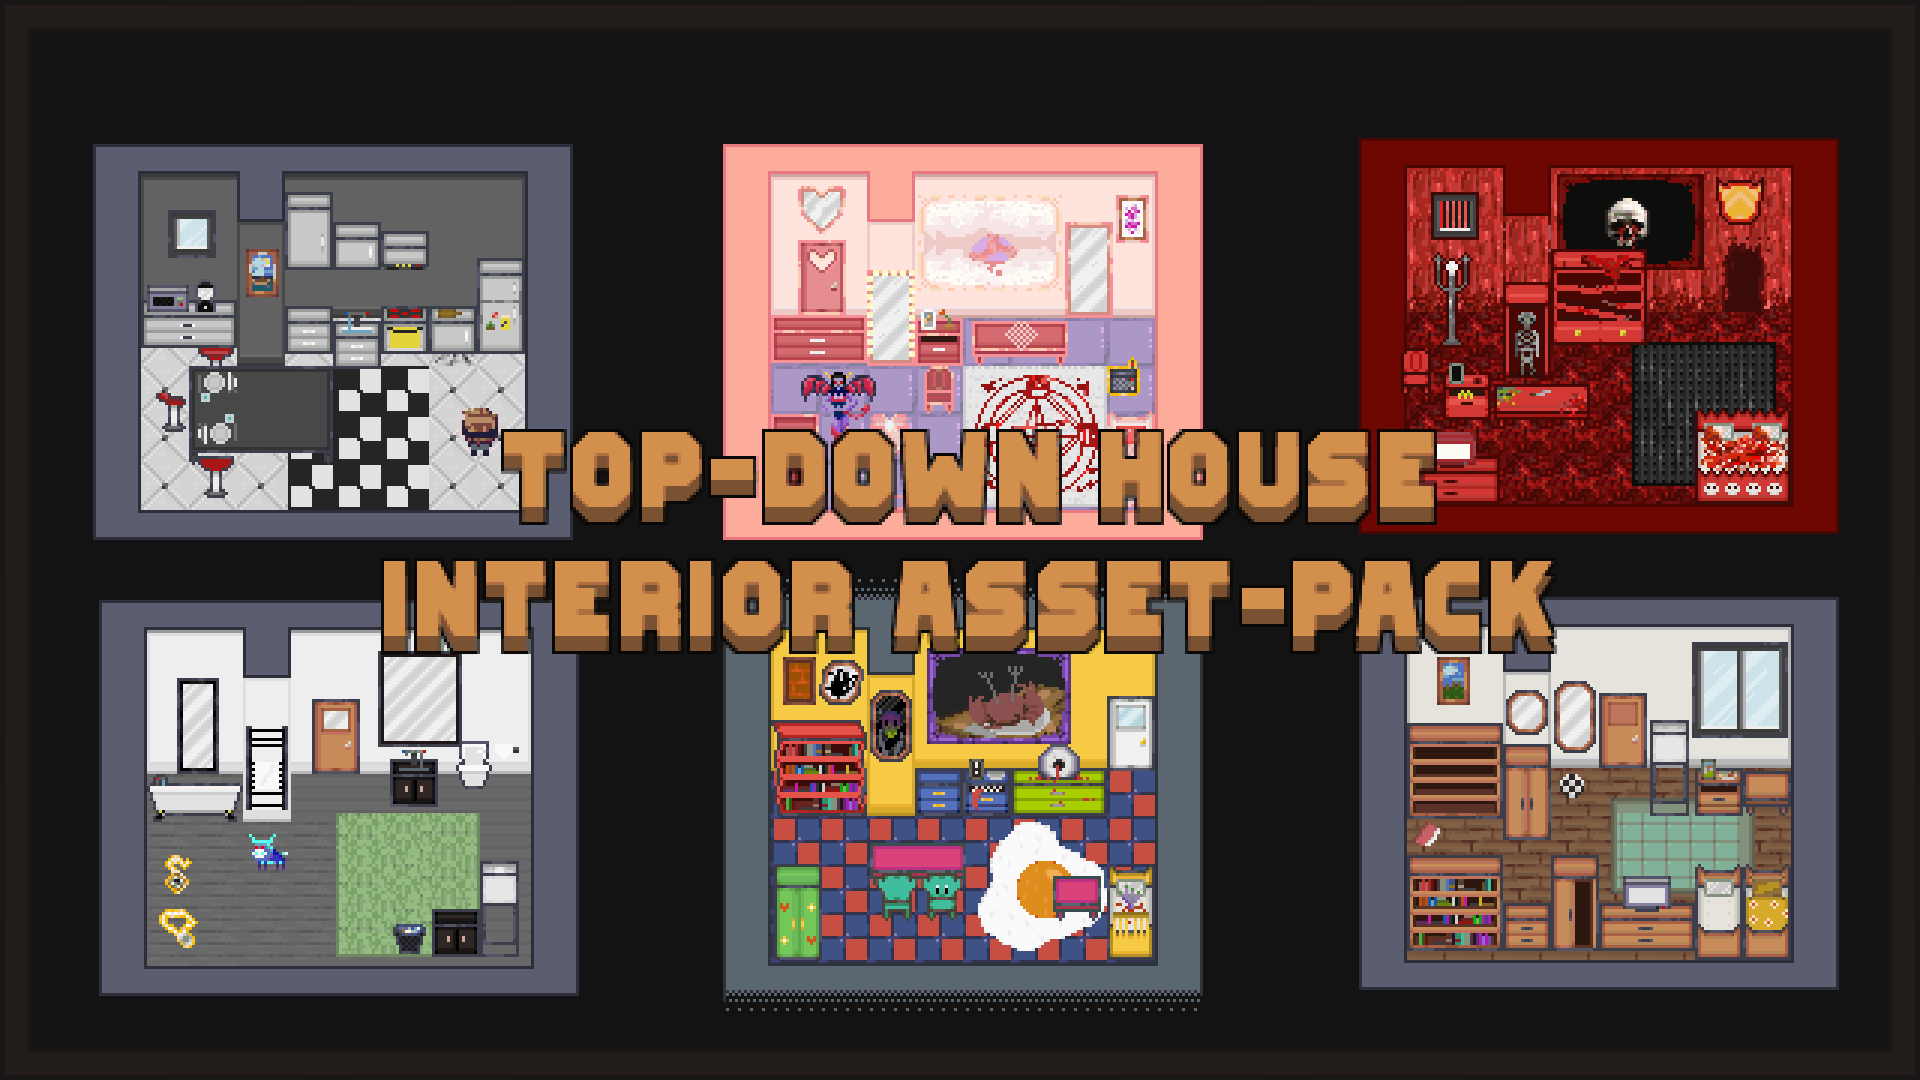 Topdown Interior House Asset-pack